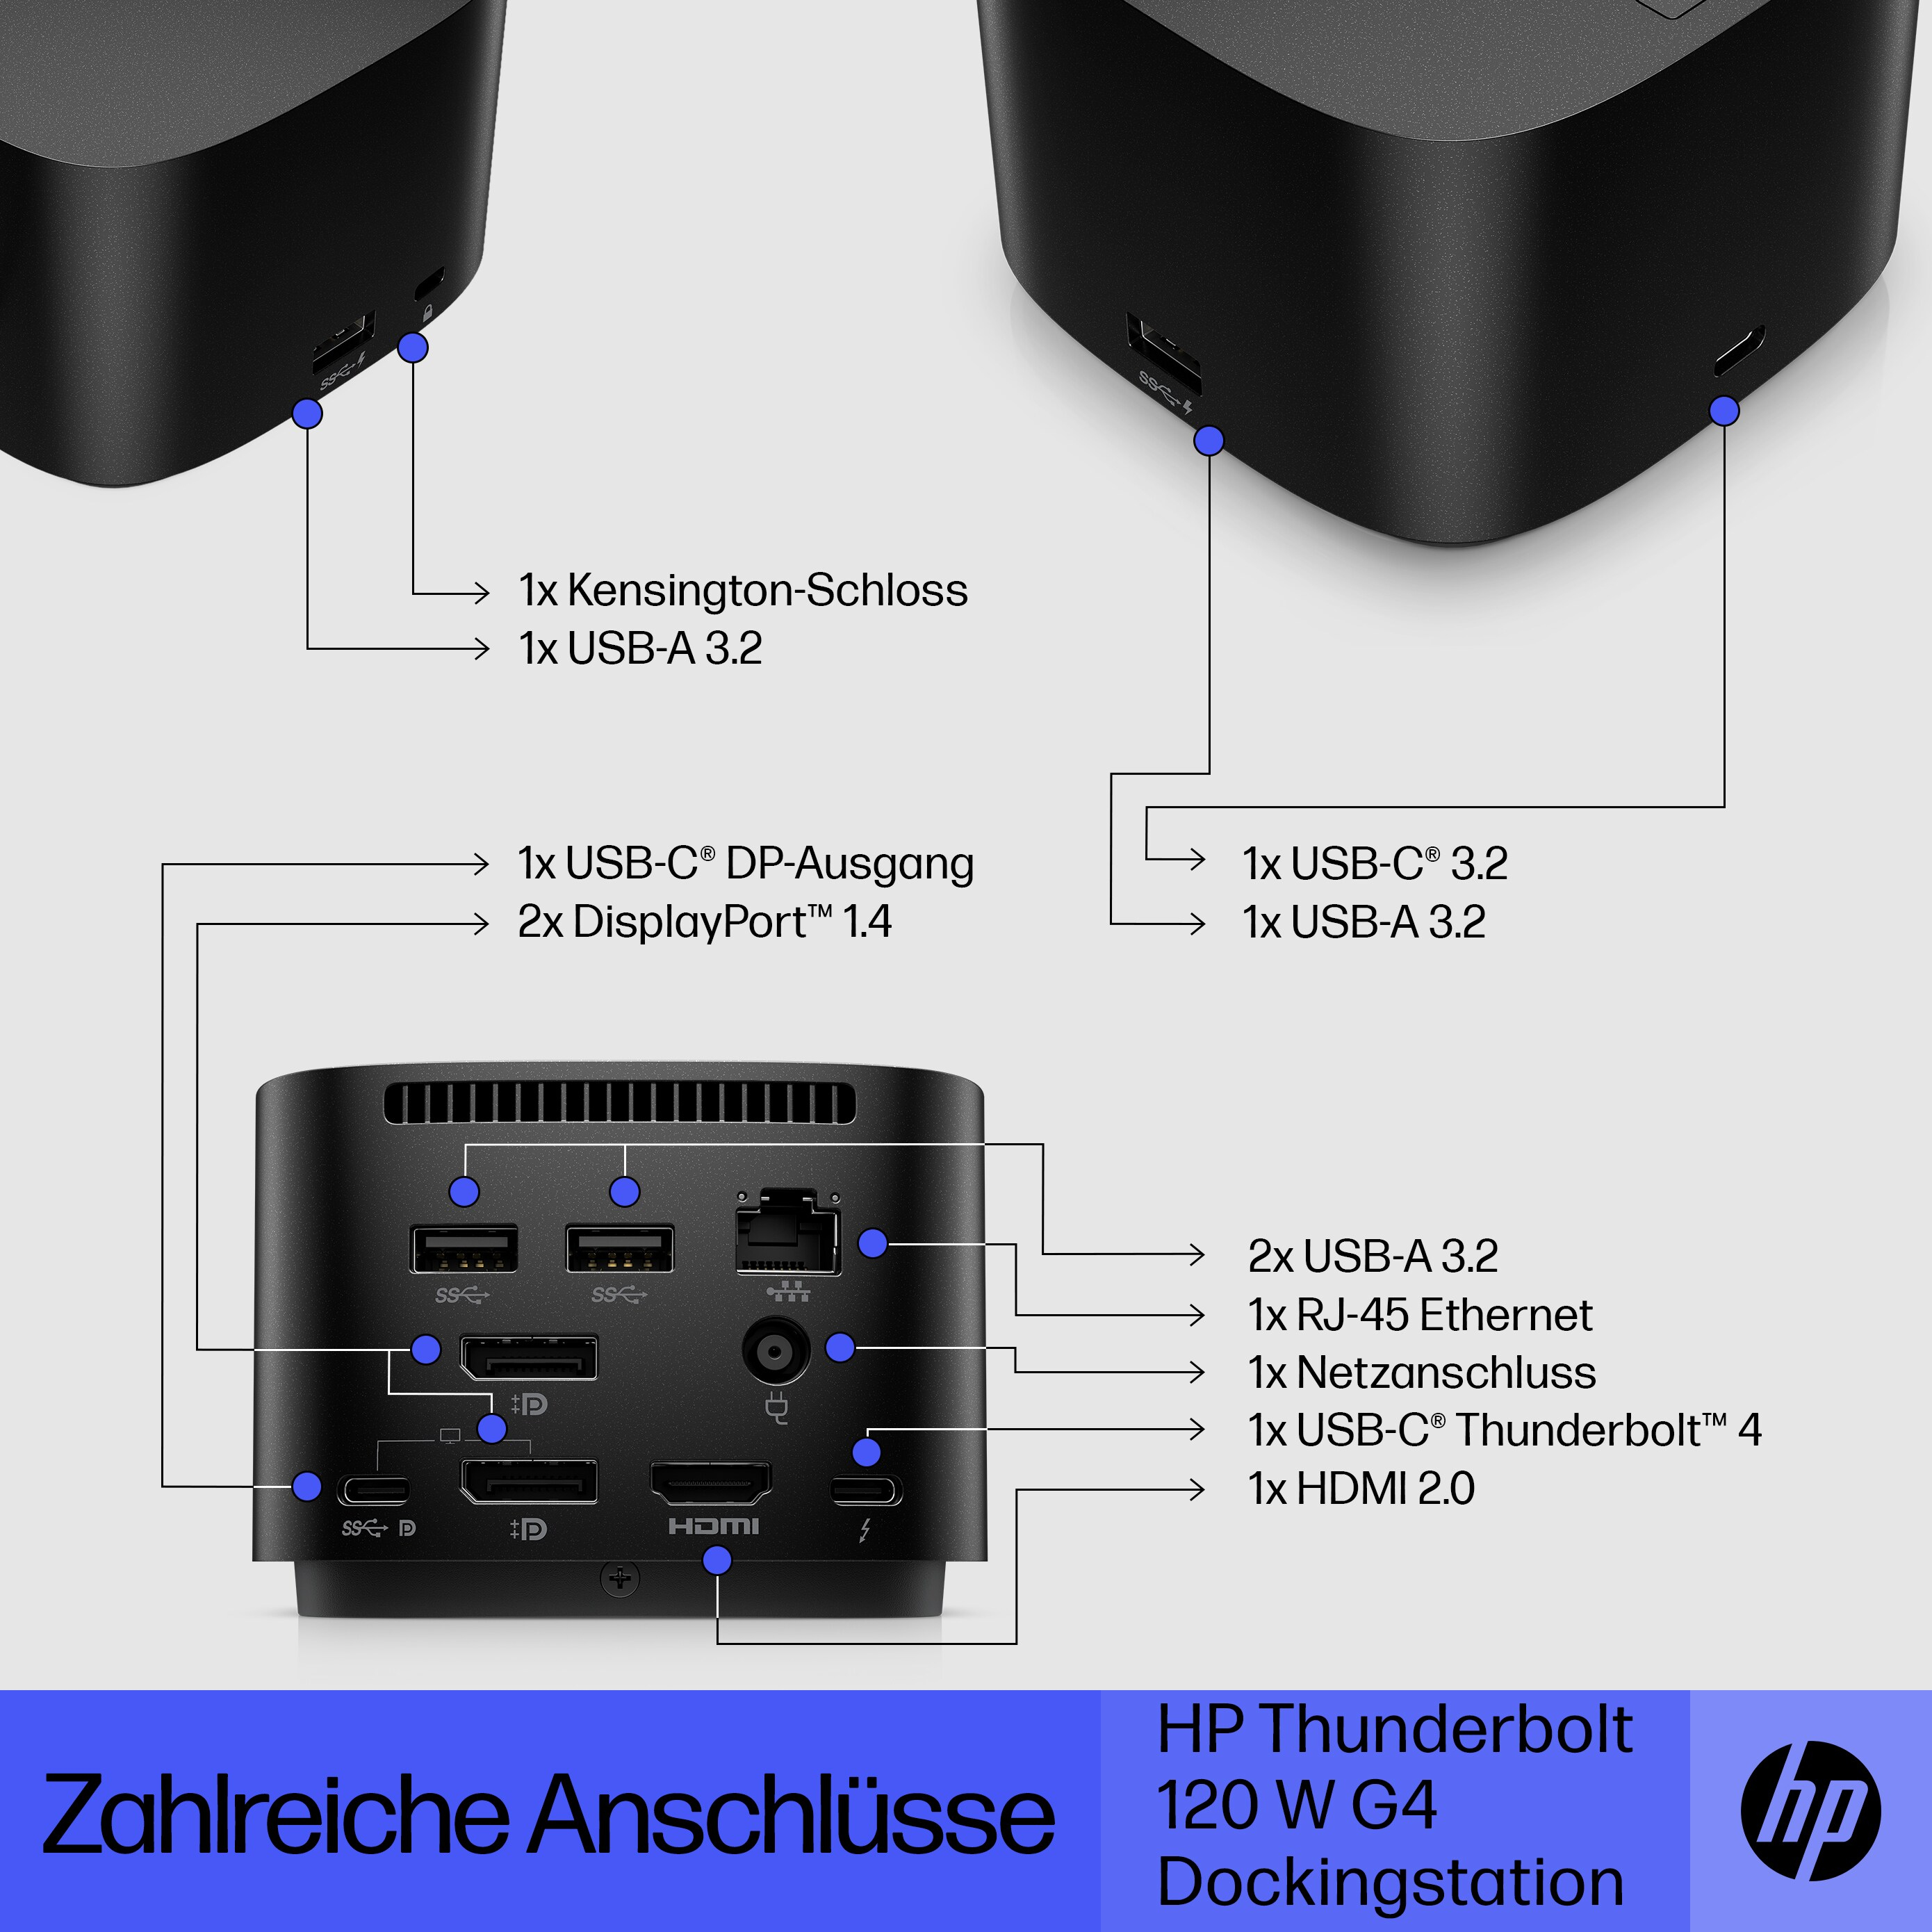 Station d'accueil HP Thunderbolt 120 W G4 - HP Store Suisse